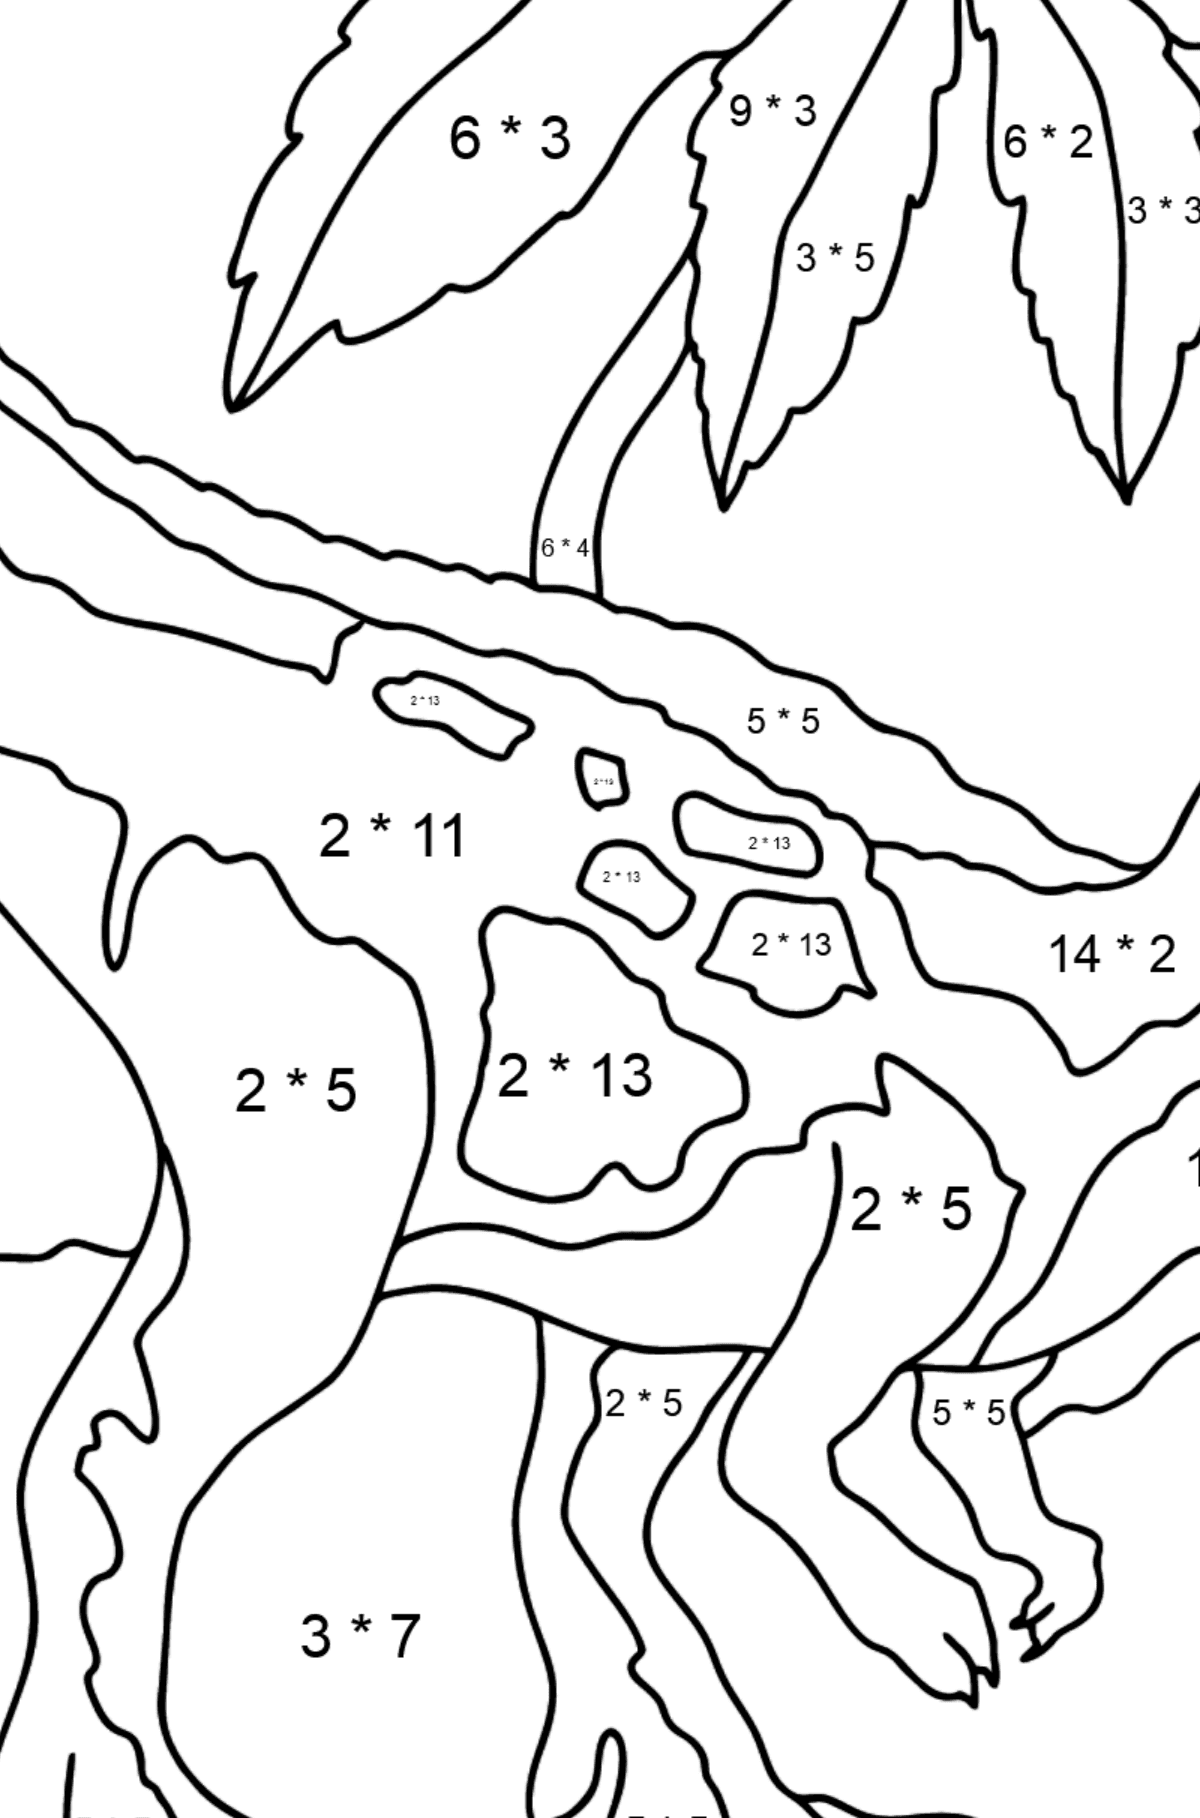 Coloring Page - Tyrannosaurus - The King of Dinosaurs - Math Coloring - Multiplication for Kids